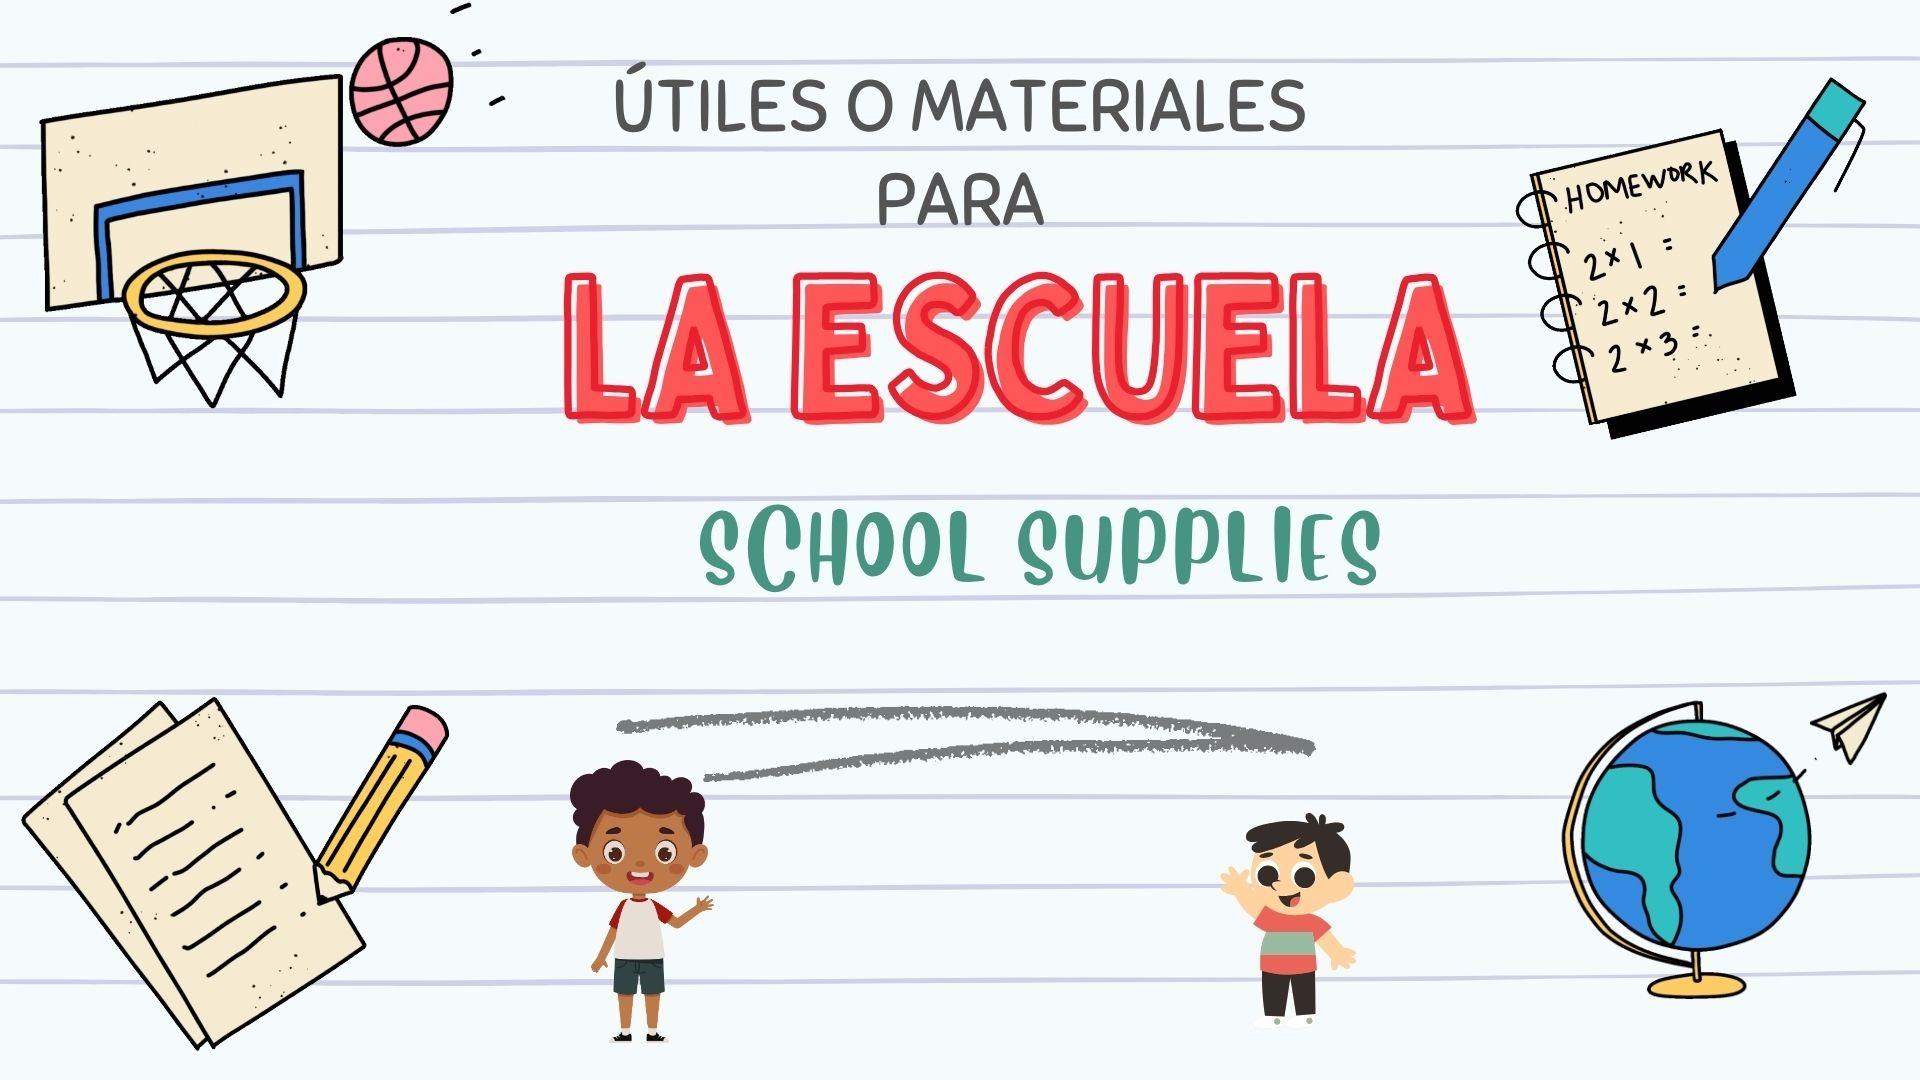 School supplies in Spanish and English